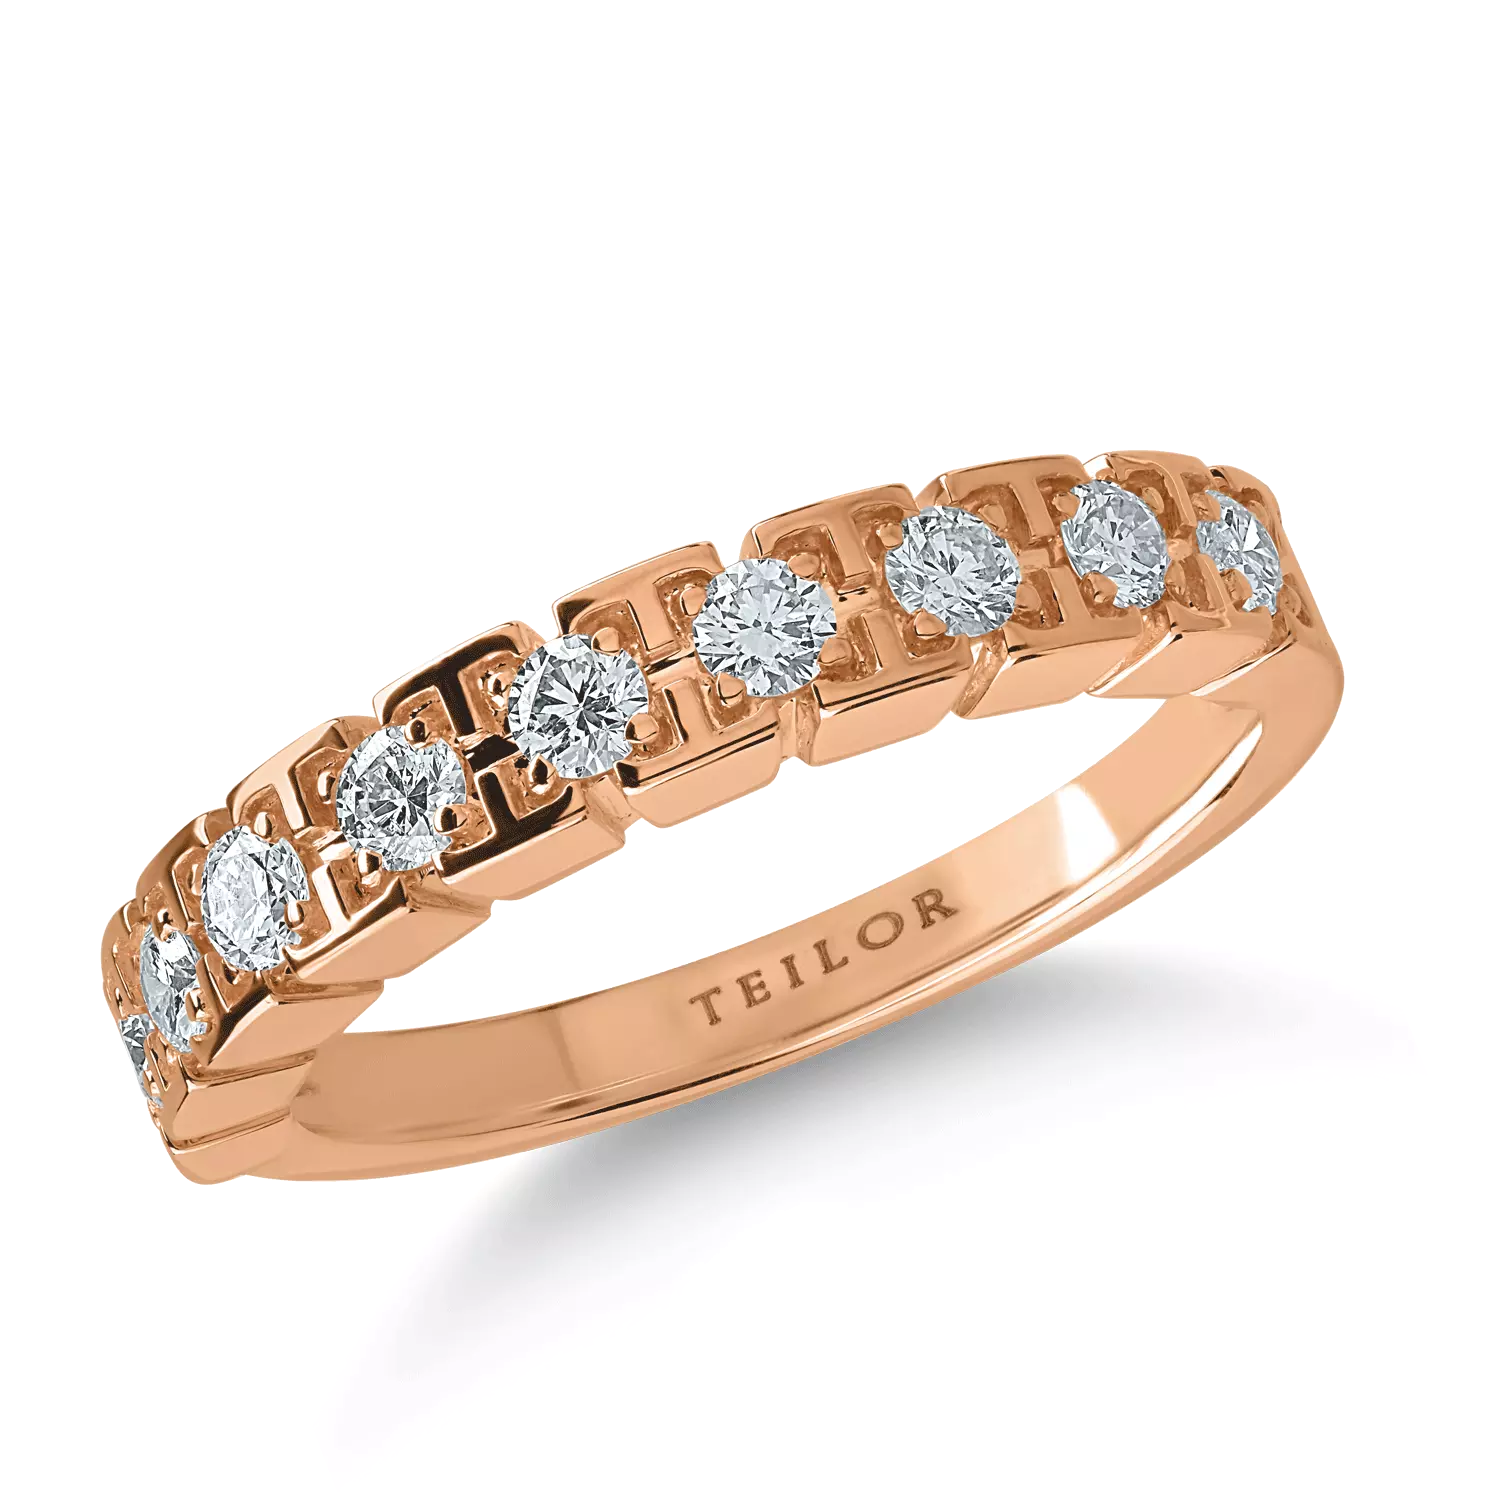 Half eternity ring in rose gold with 0.38ct diamonds